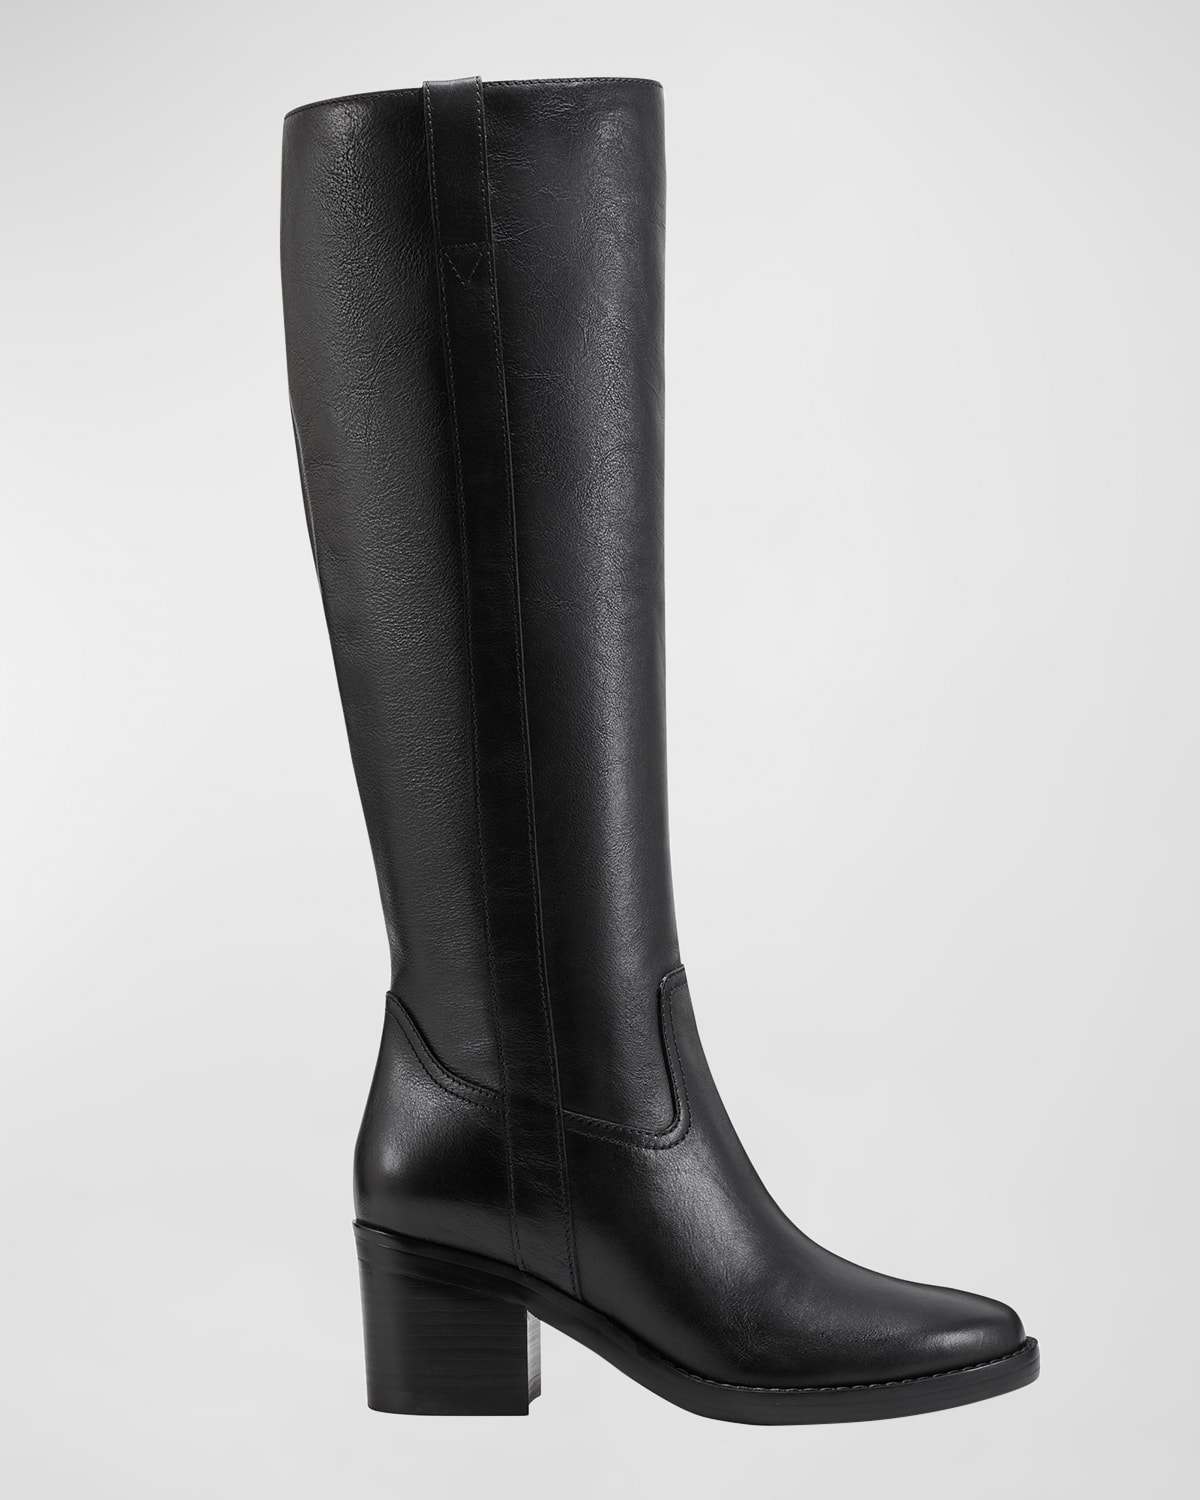 MARC FISHER LTD HYDRIA LEATHER RIDING BOOTS